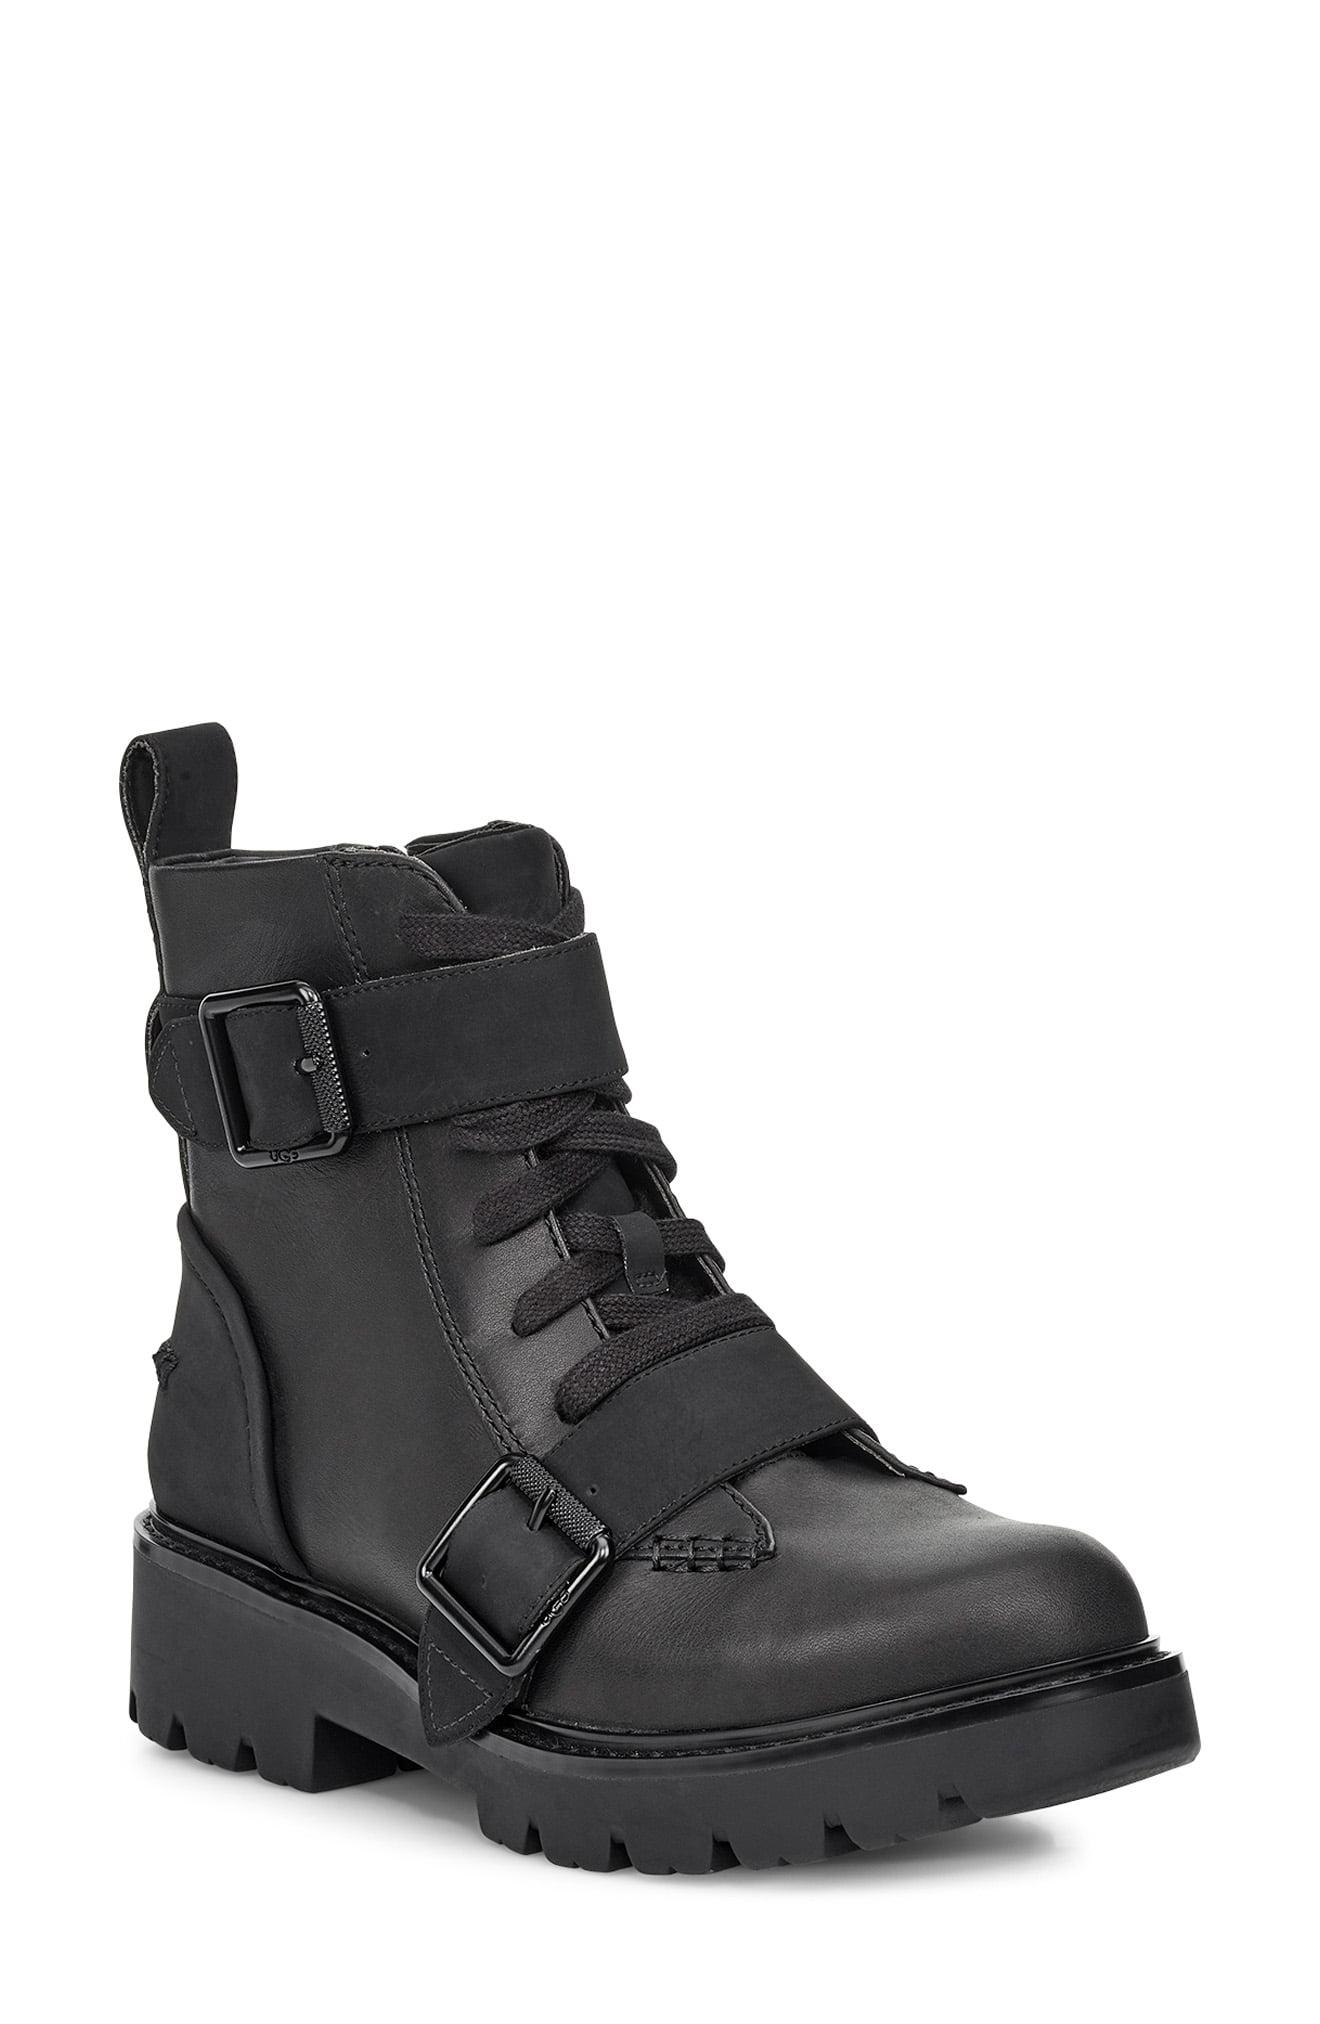 UGG Leather UGG Noe Moto Boot in Black Leather (Black) Lyst